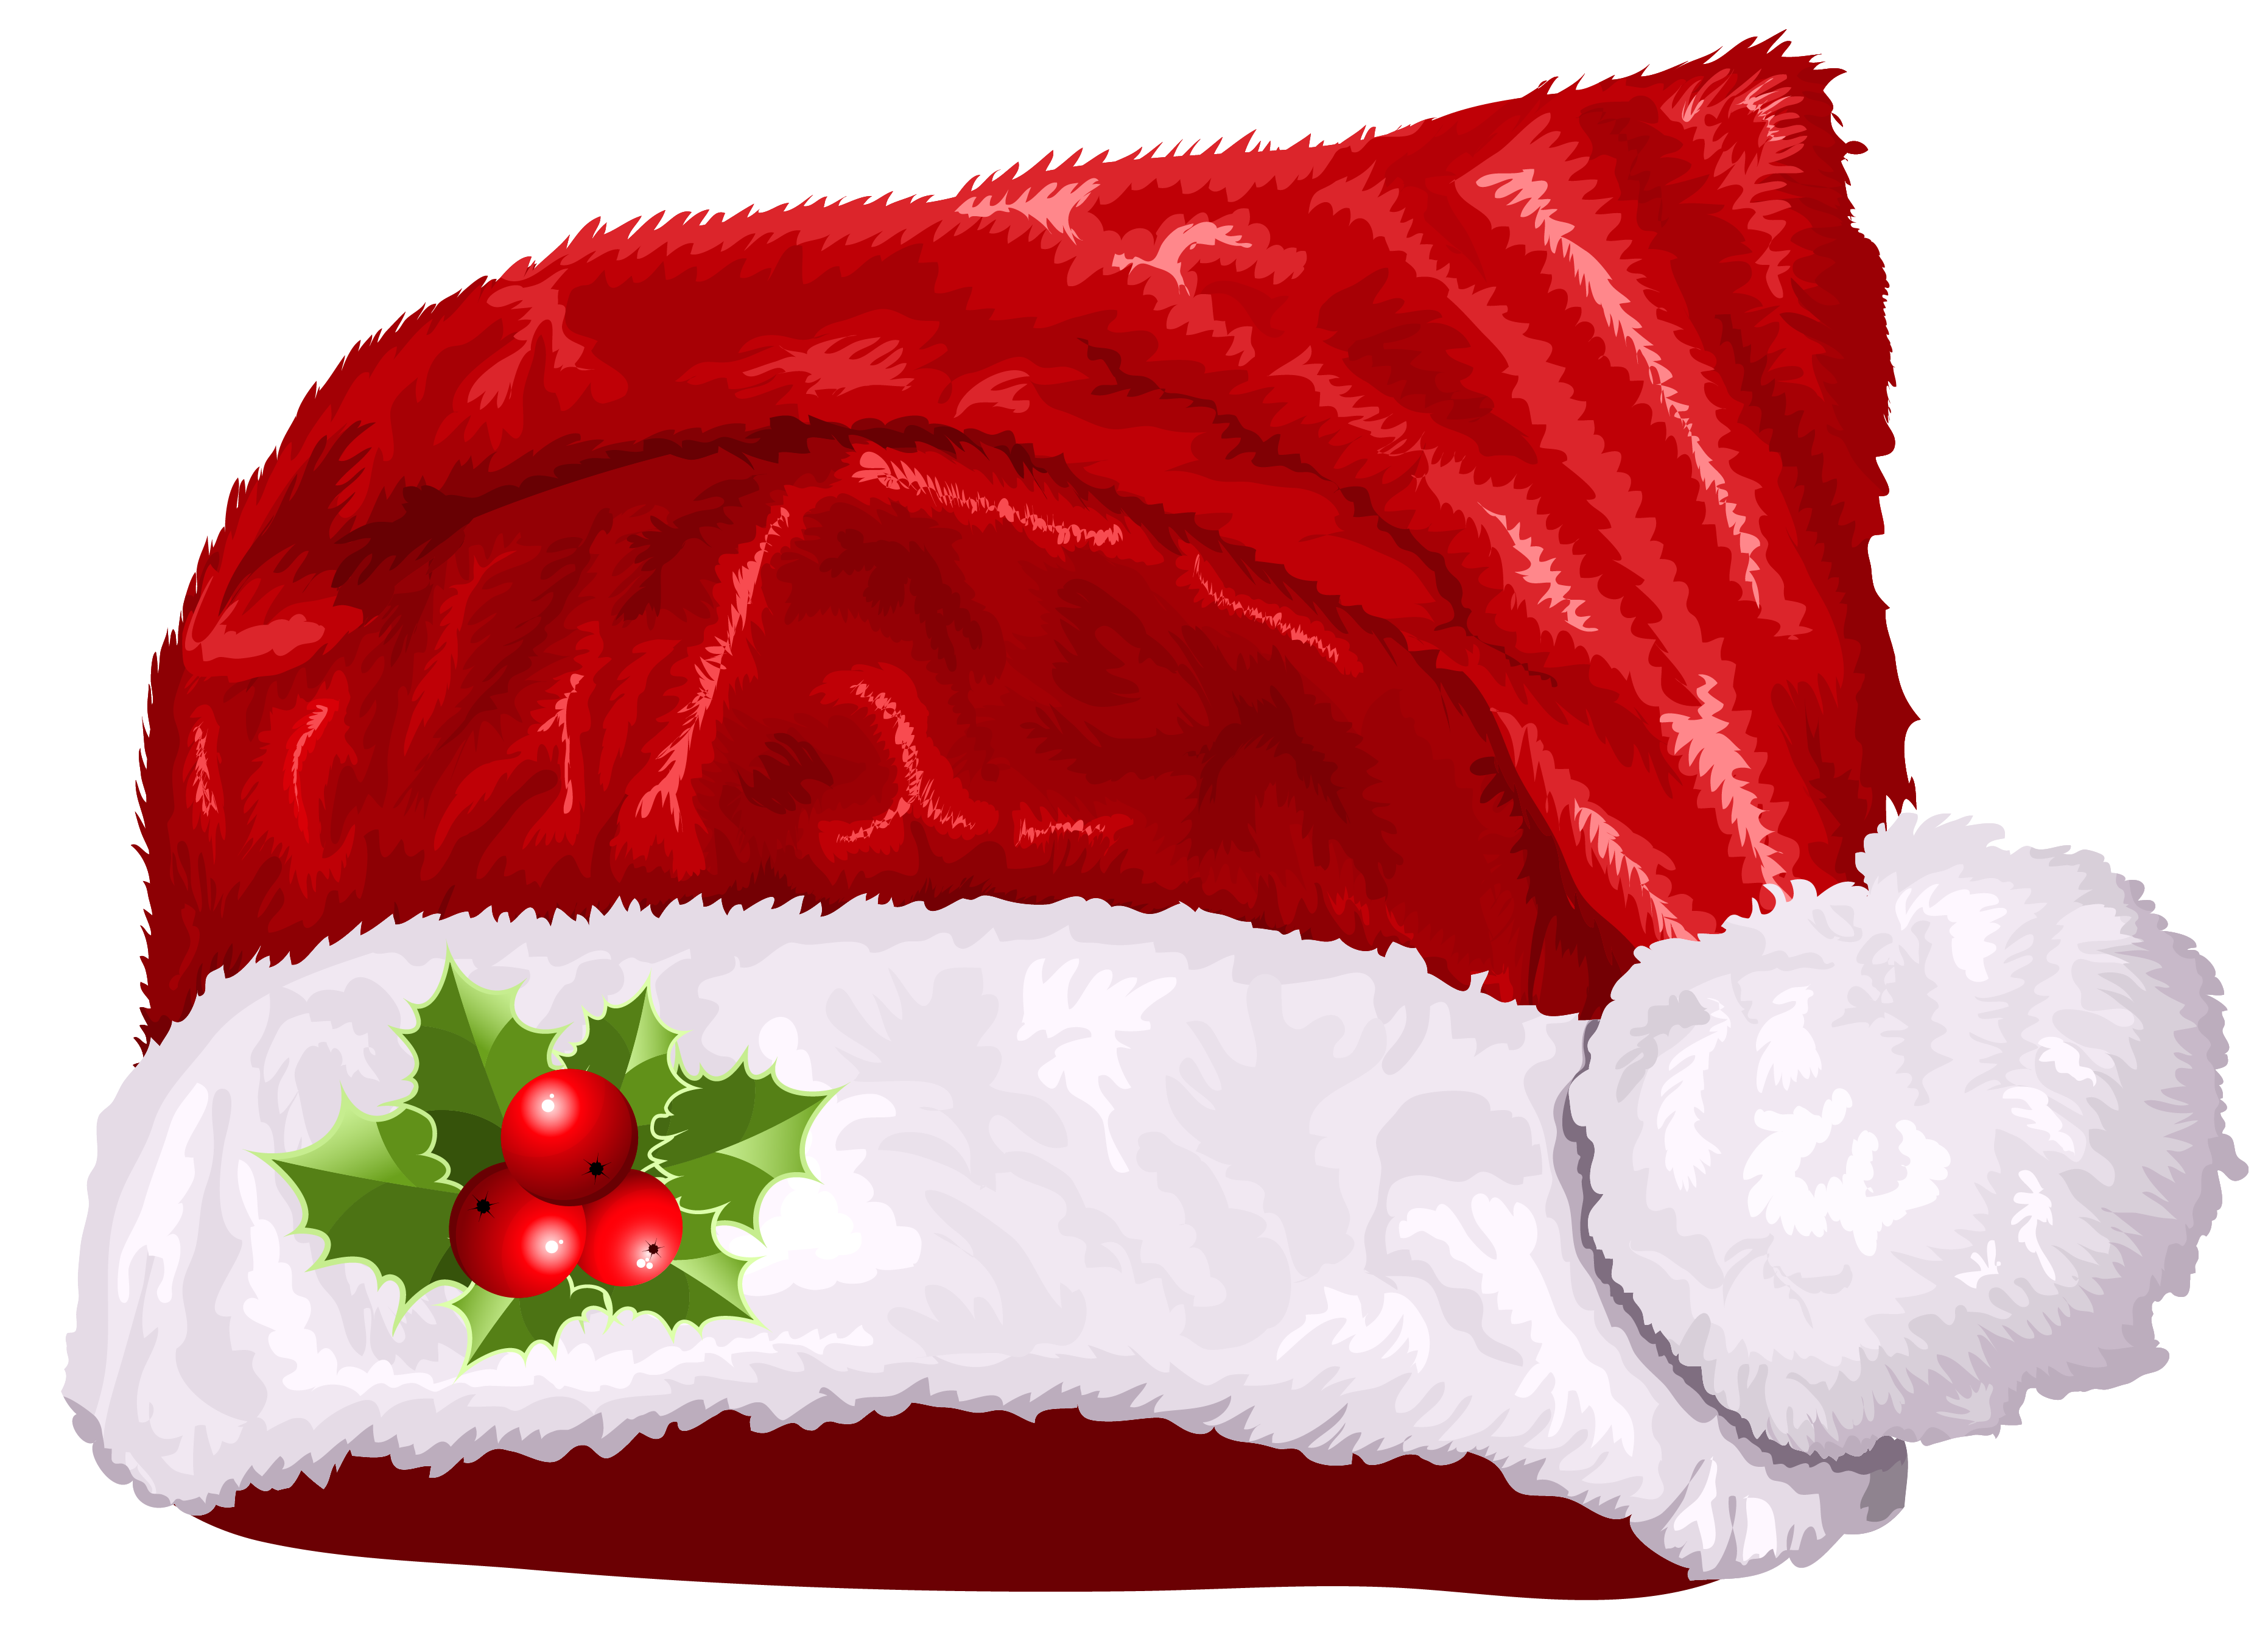 father christmas hat clipart - photo #34